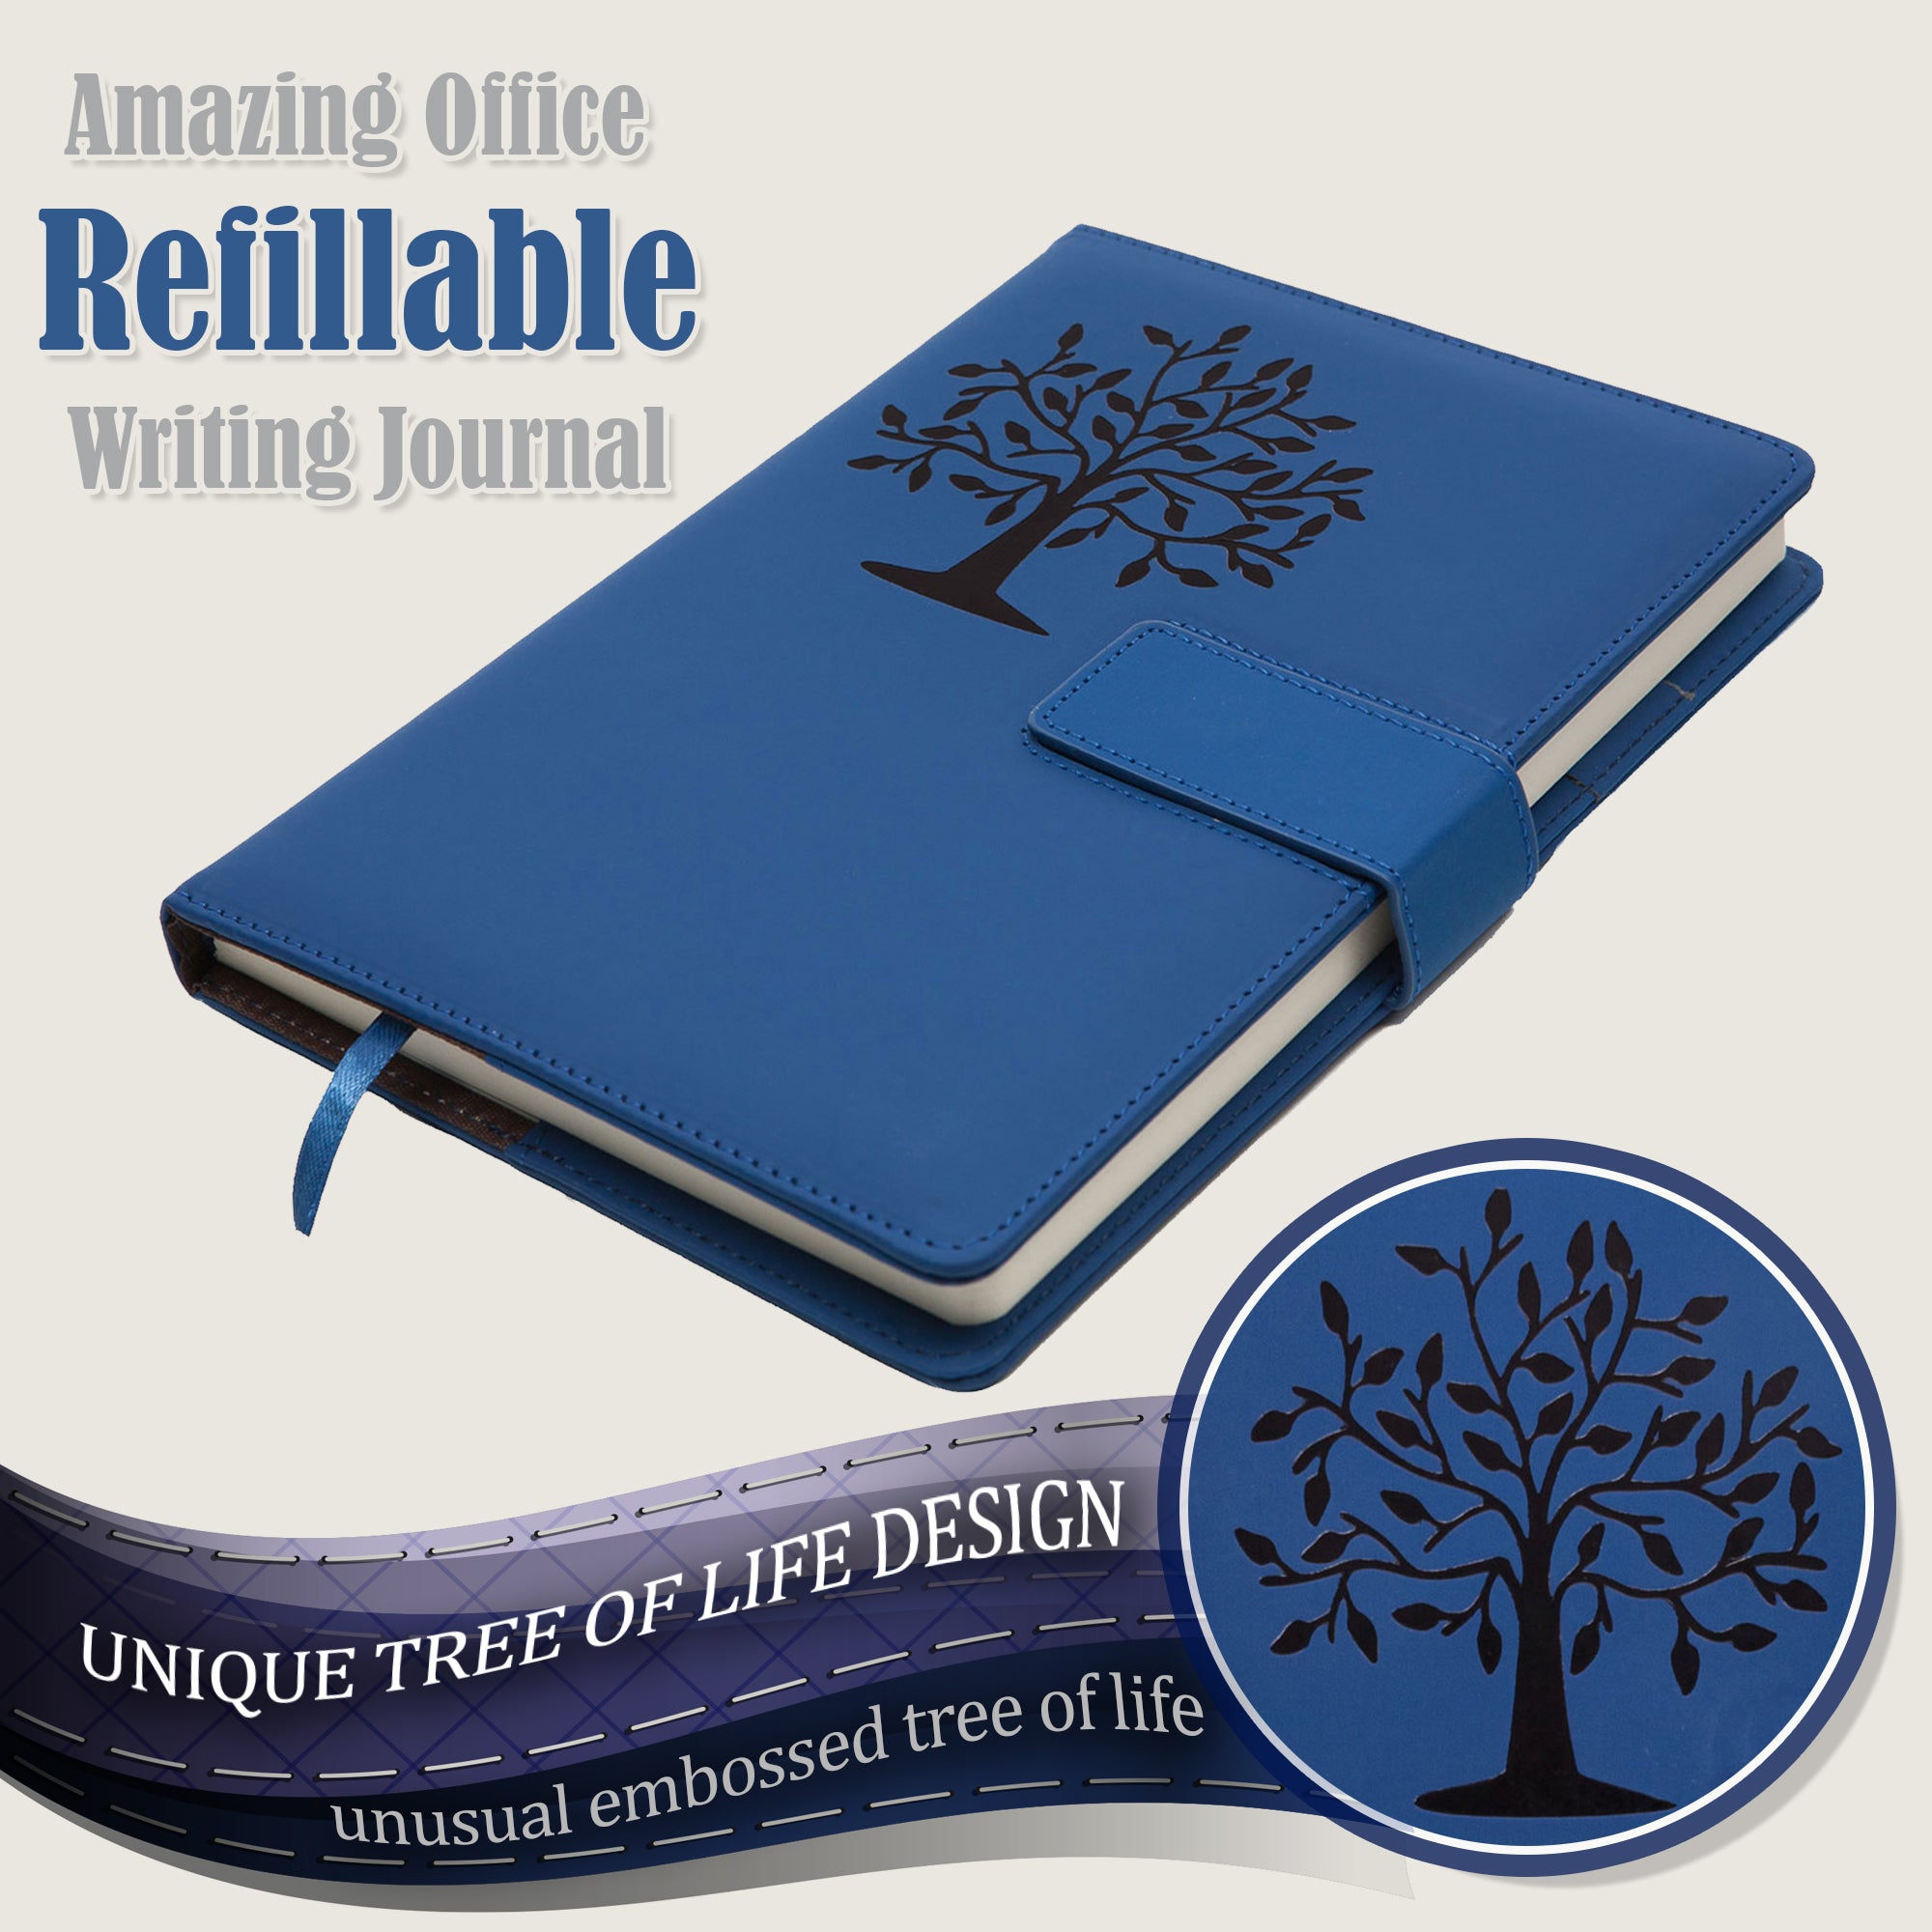 Tree Of Life Refillable Writing Journal Available In 3 Colors The Amazing Office